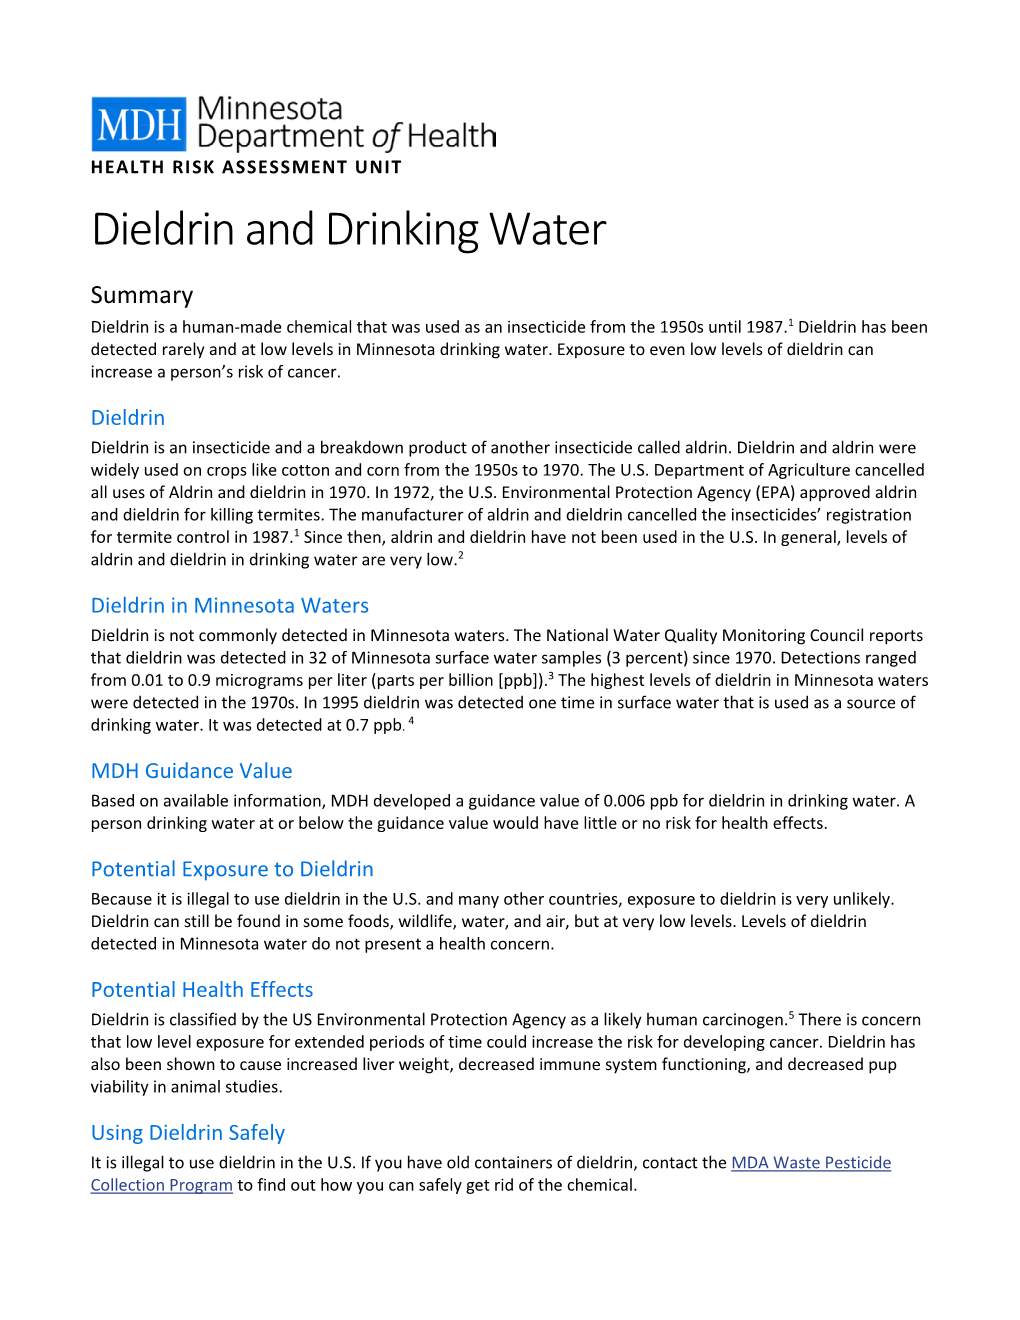 Dieldrin and Drinking Water